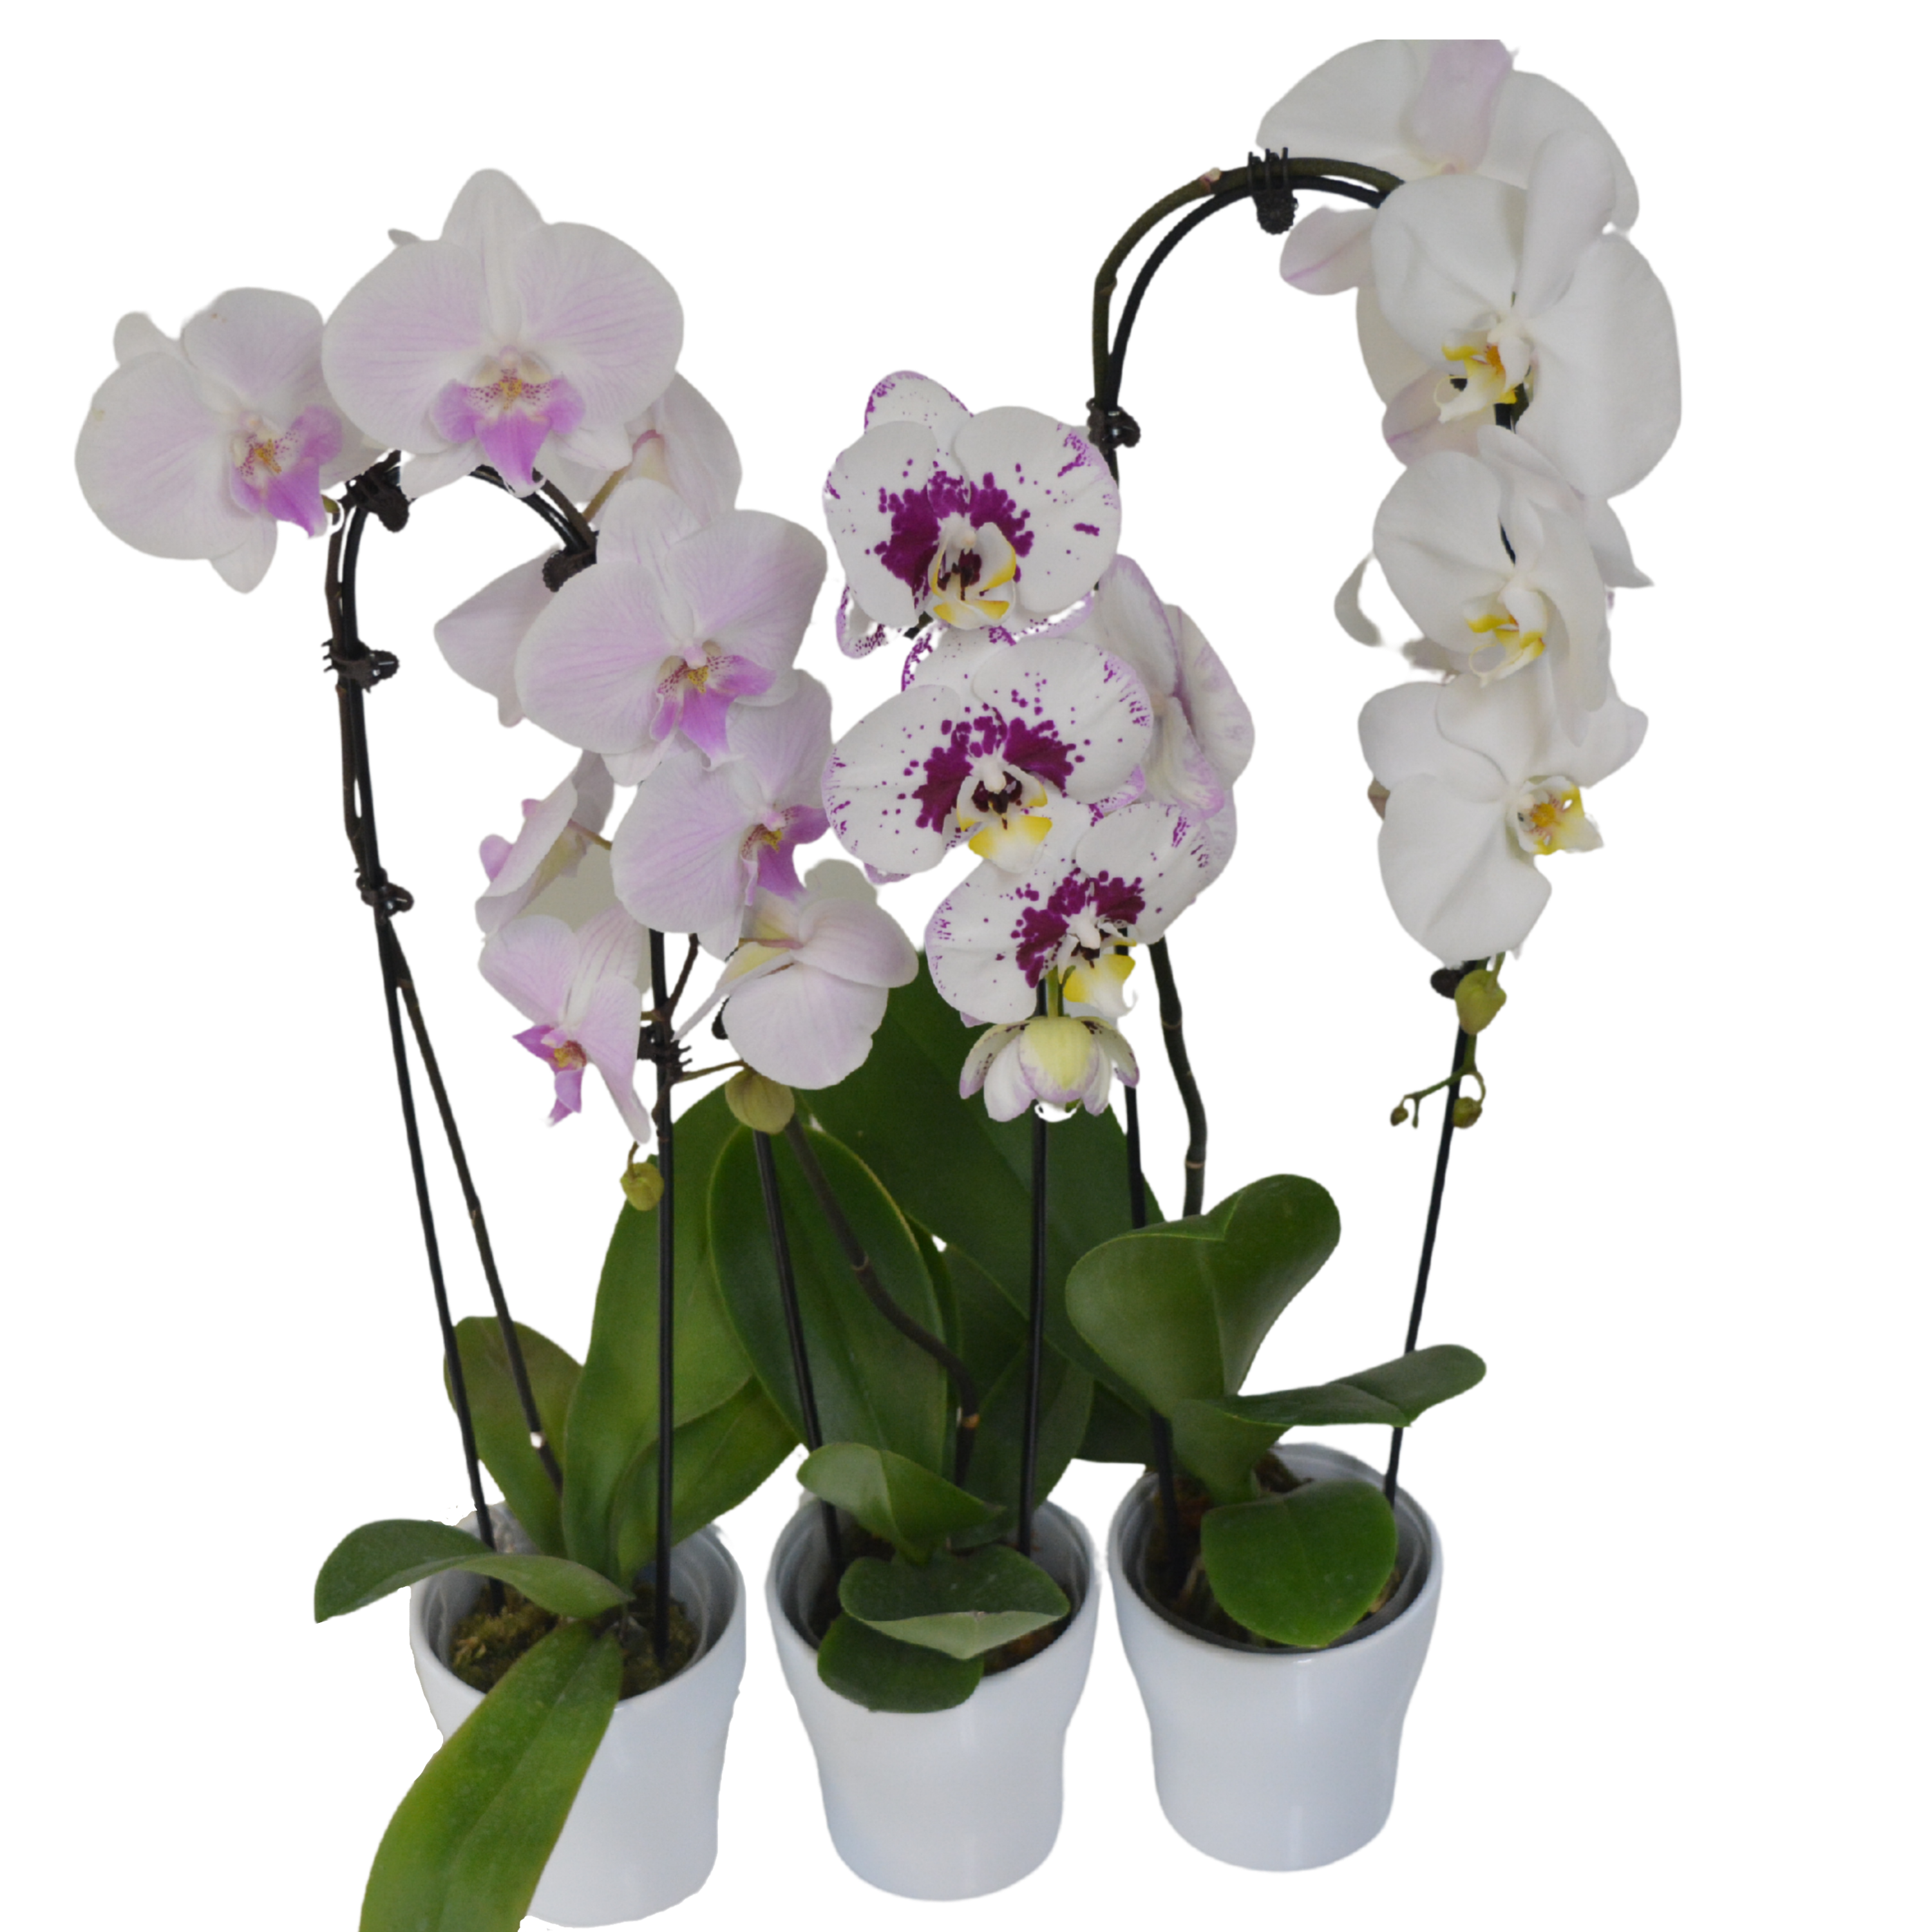 5" Cascading Single Spike Orchid in Ceramic